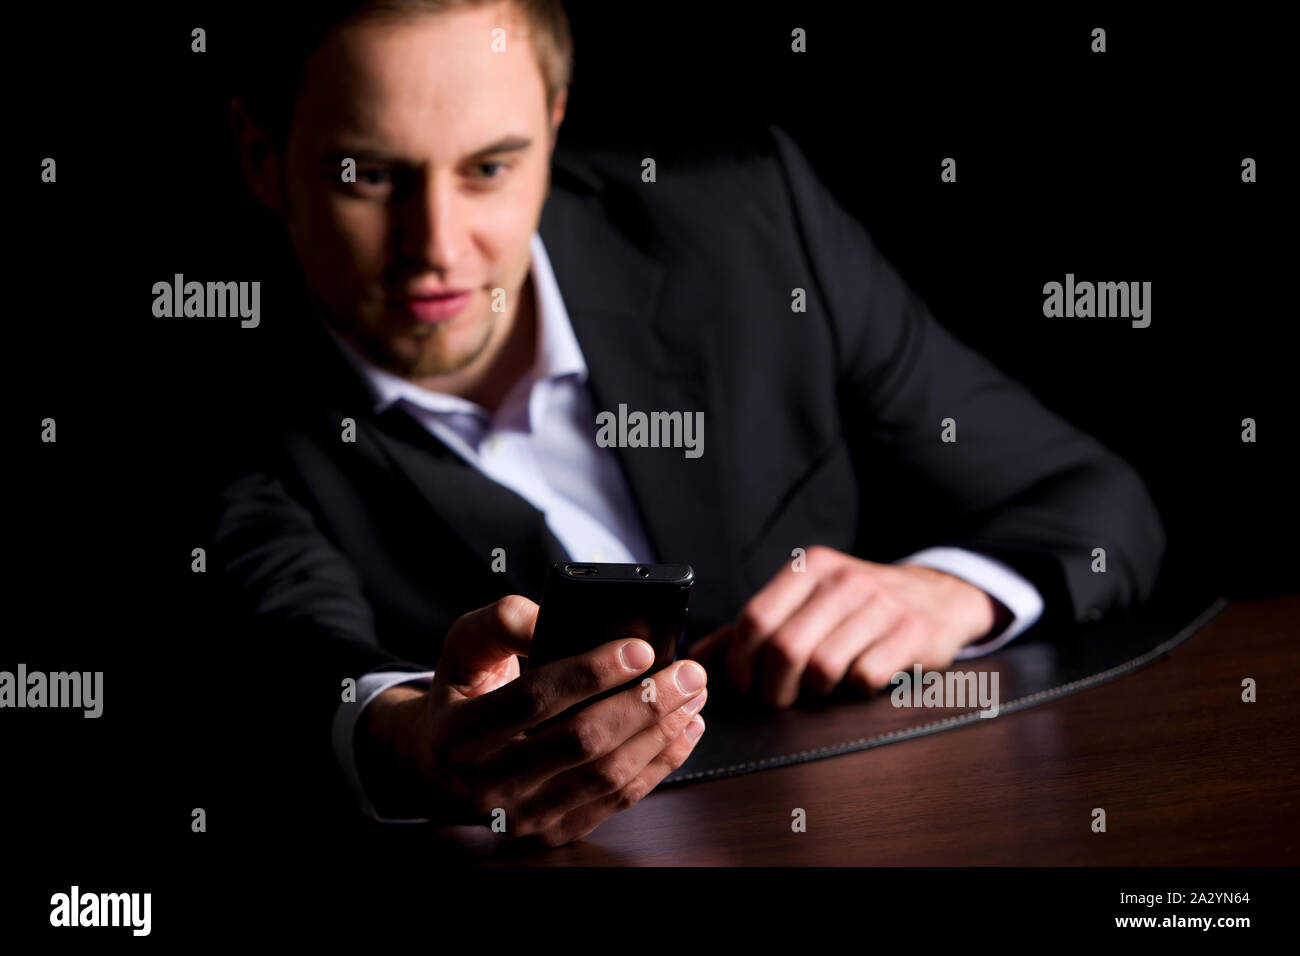 Businessman checking text messages on phone. Stock Photo